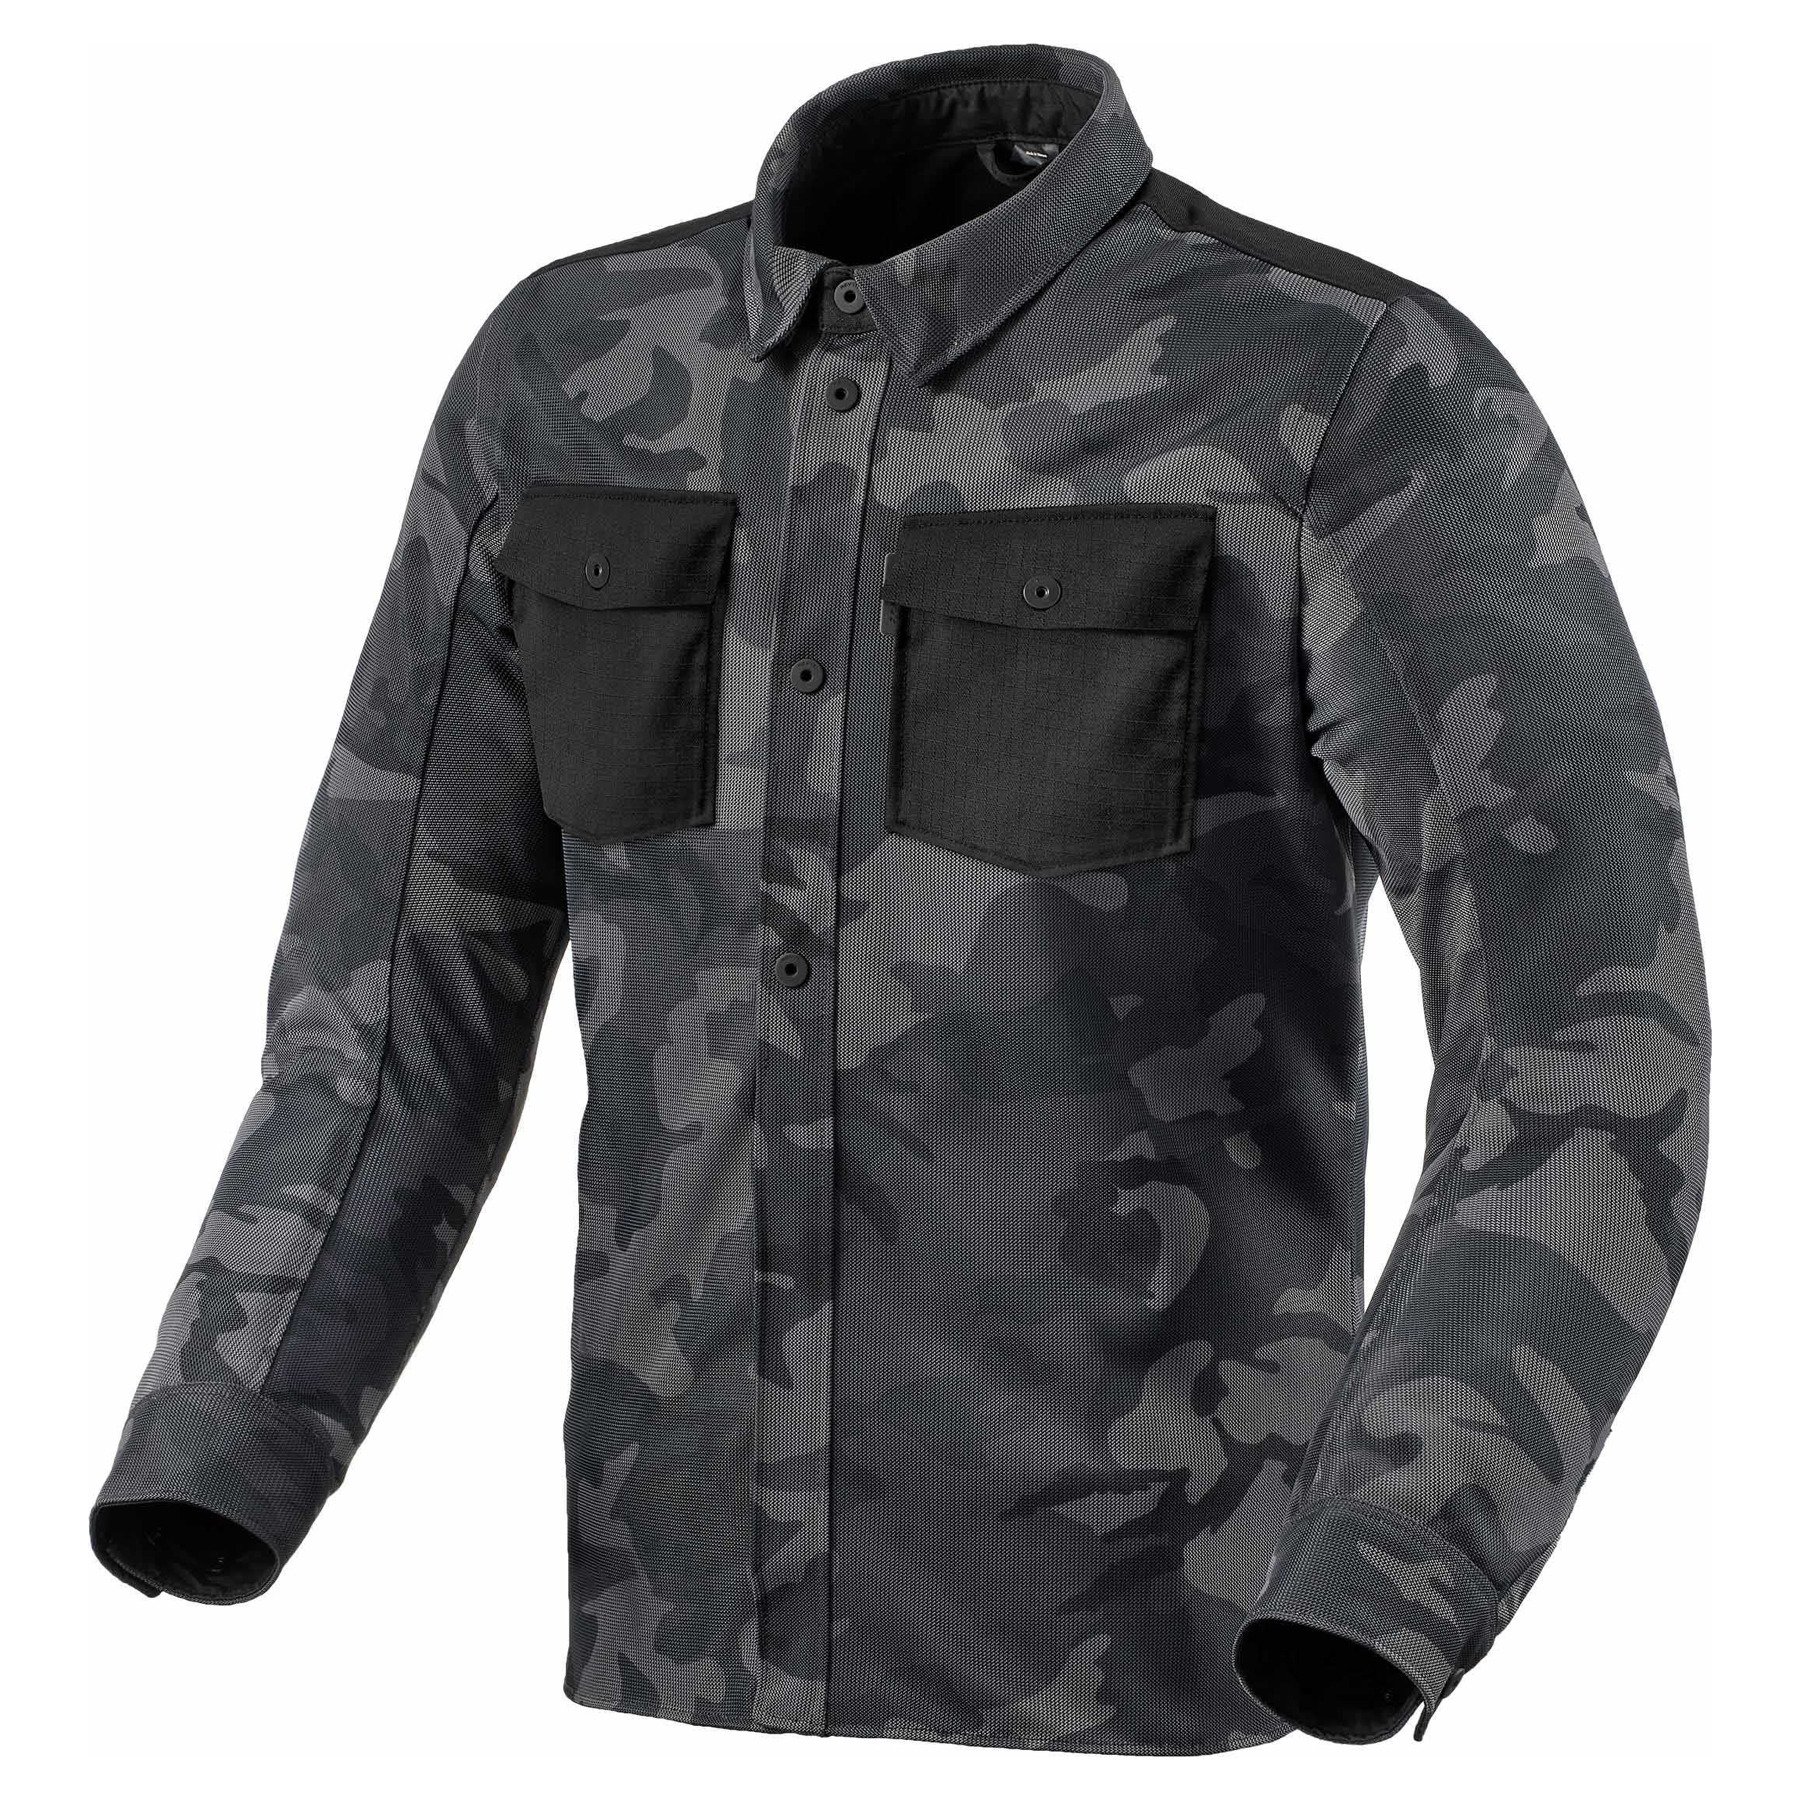 Image of REV'IT! Overshirt Tracer Air 2 Camo Dark Gris Blouson Taille S